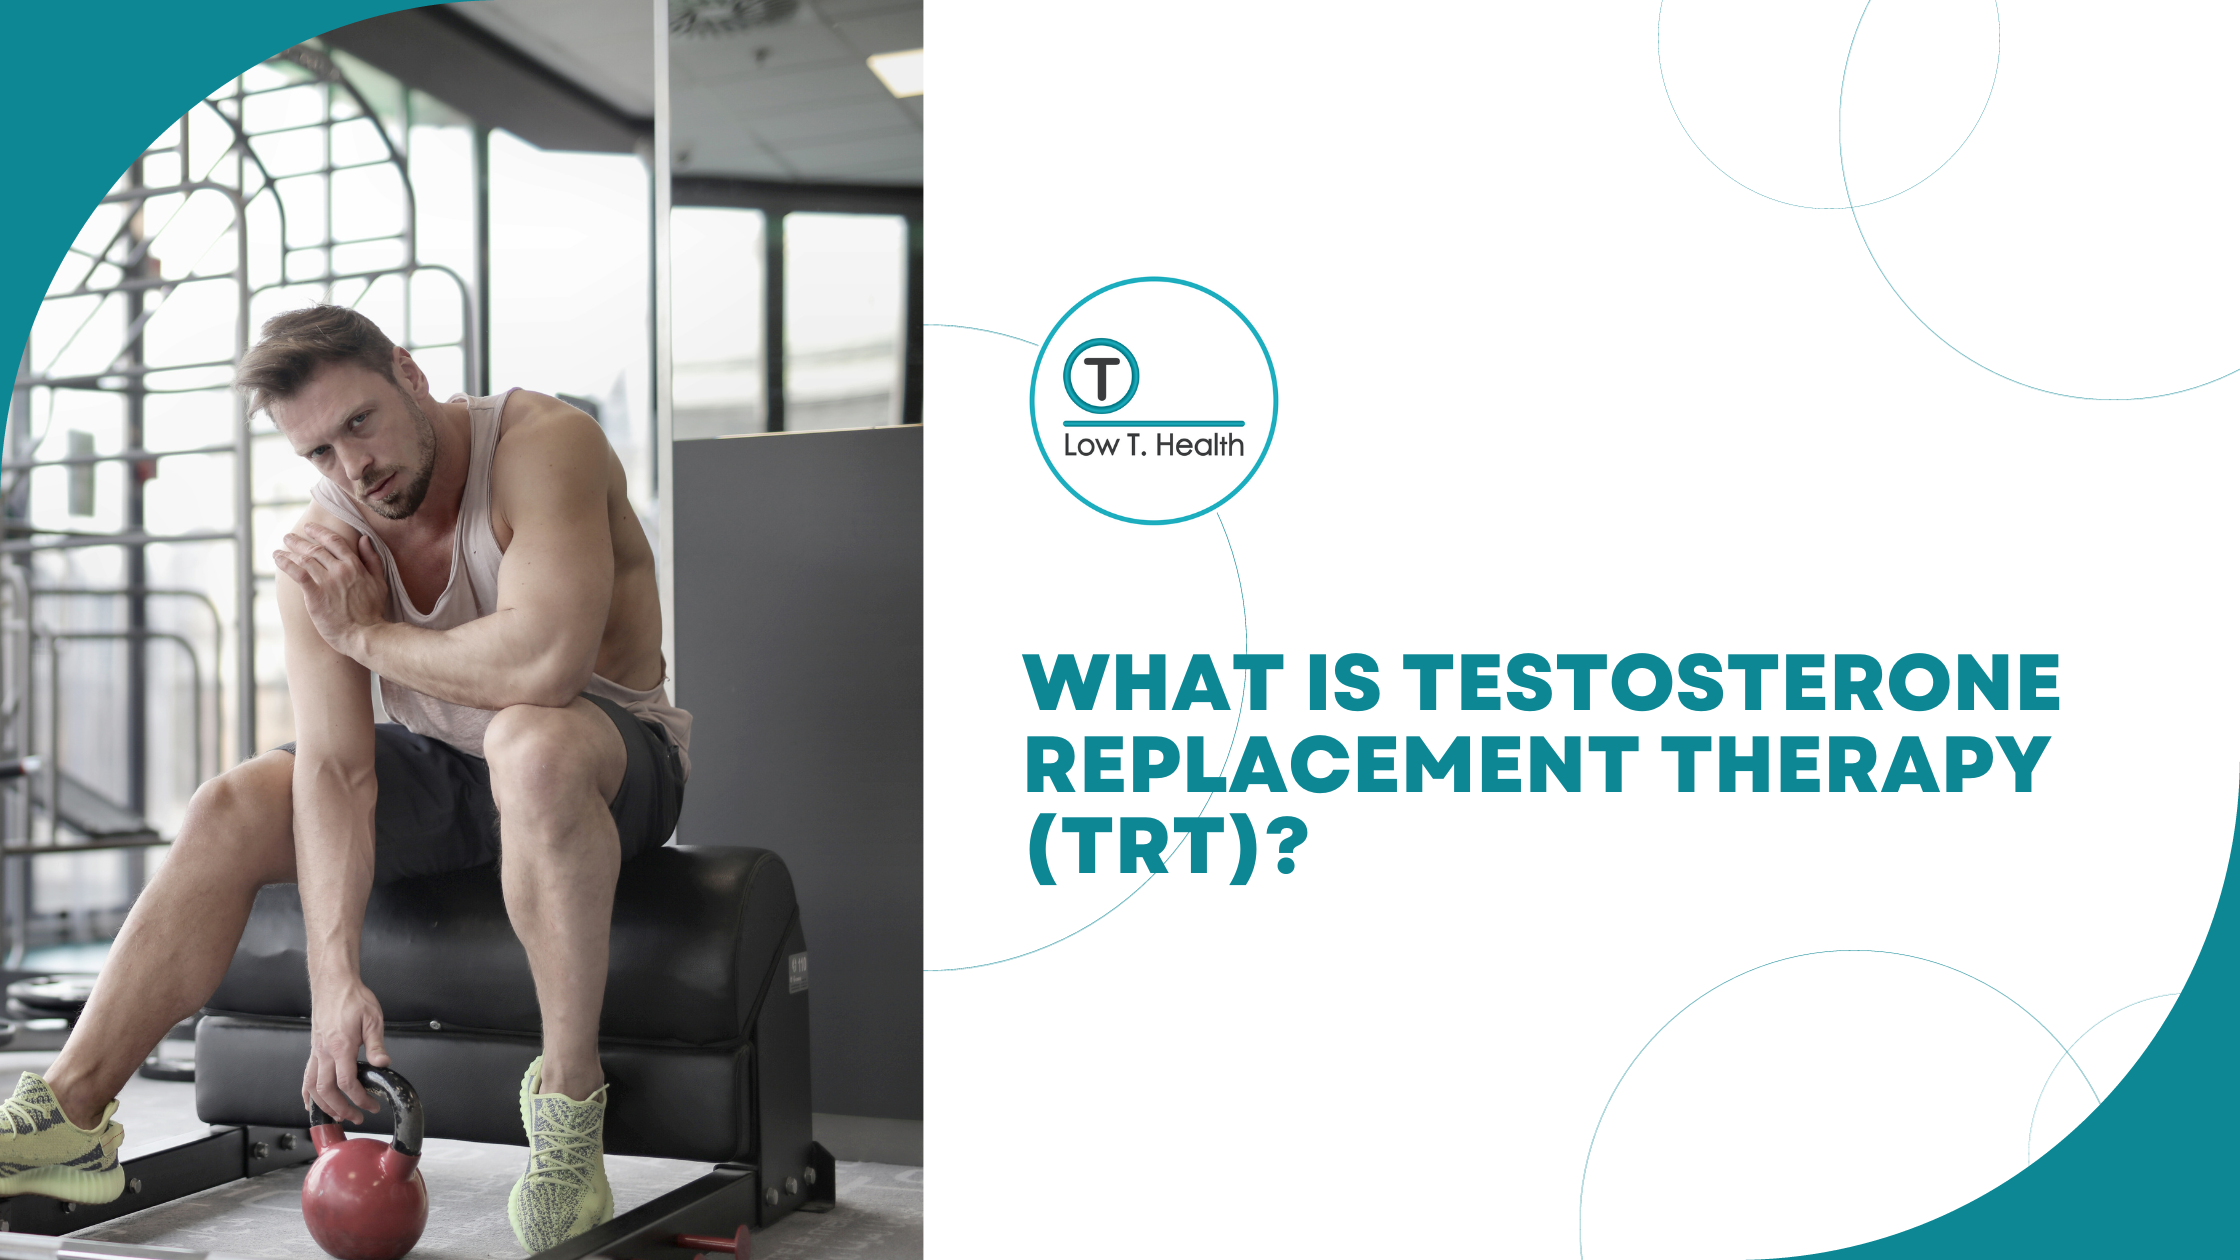 What is Testosterone Replacement Therapy (TRT)?